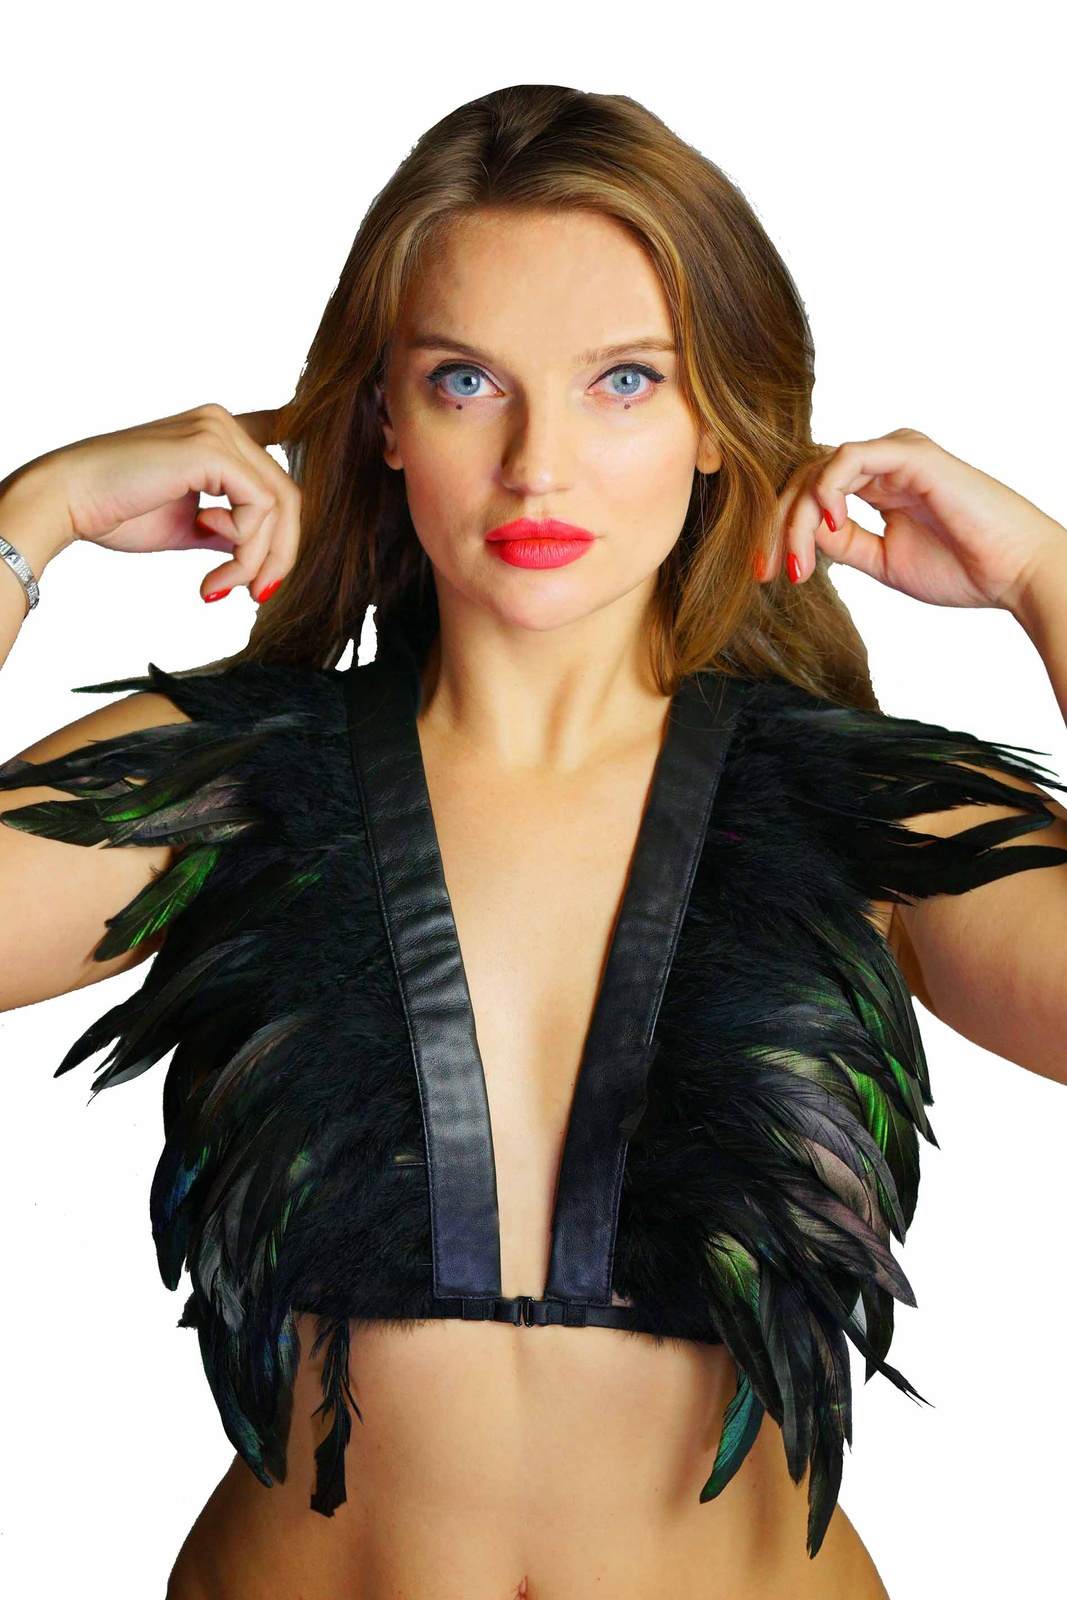 LK Signature Feather Bralette Festival Top, black leather crop top by Love Khaos